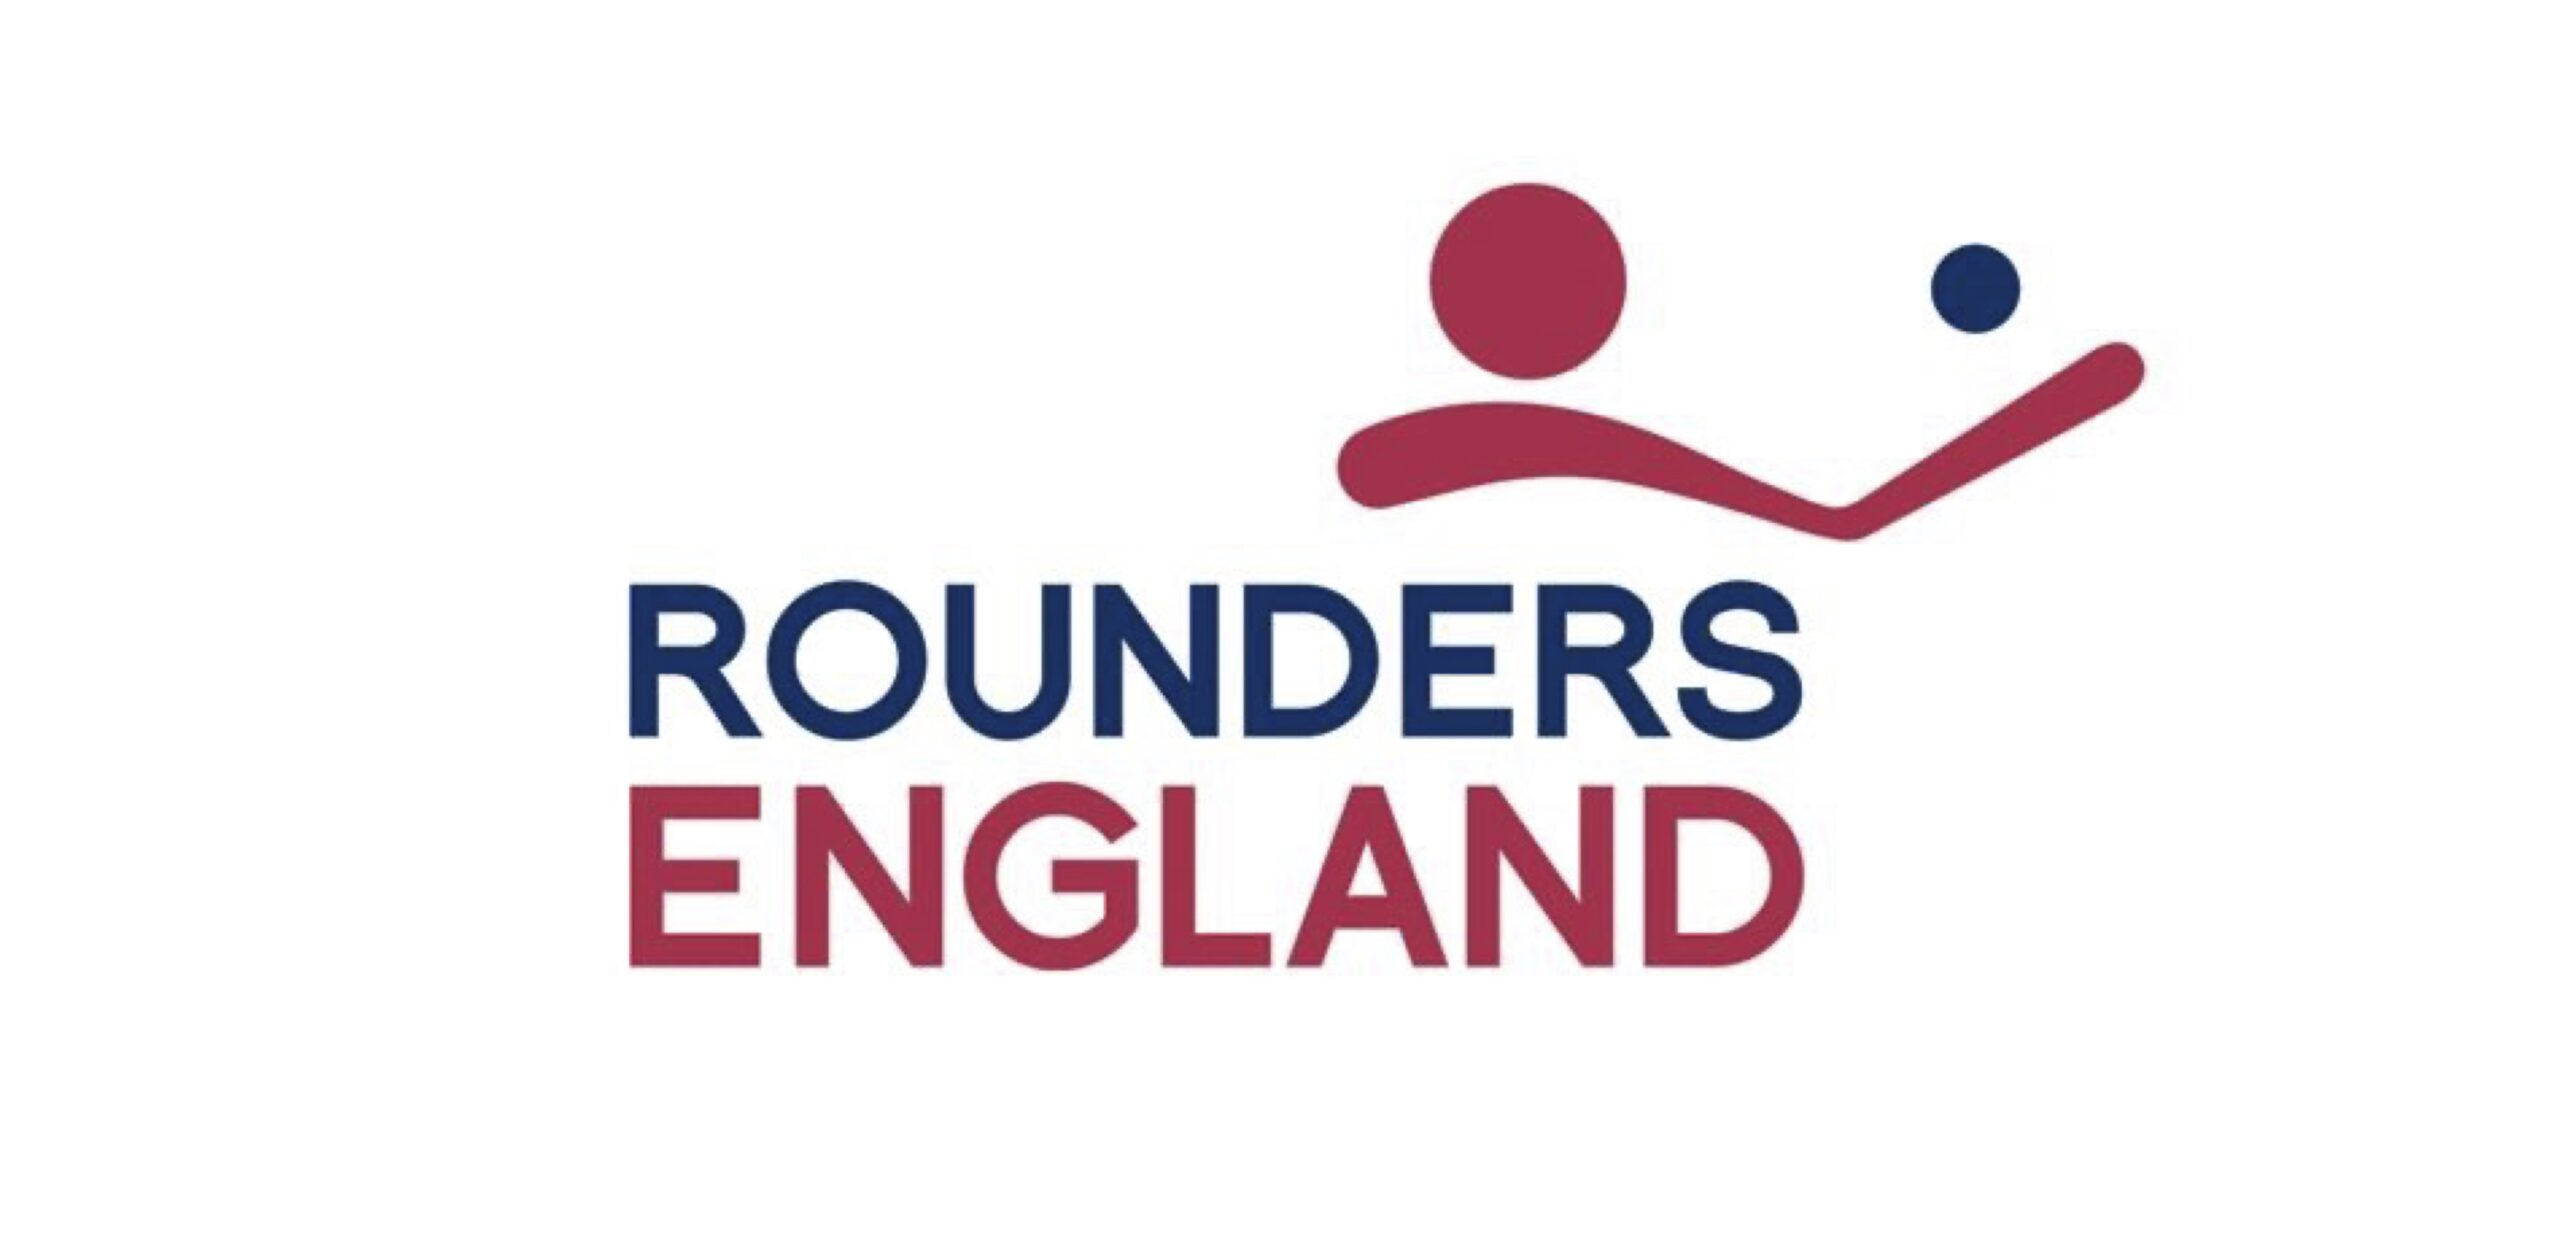 Helping to grow and develop one of the nations much loved game – Rounders!